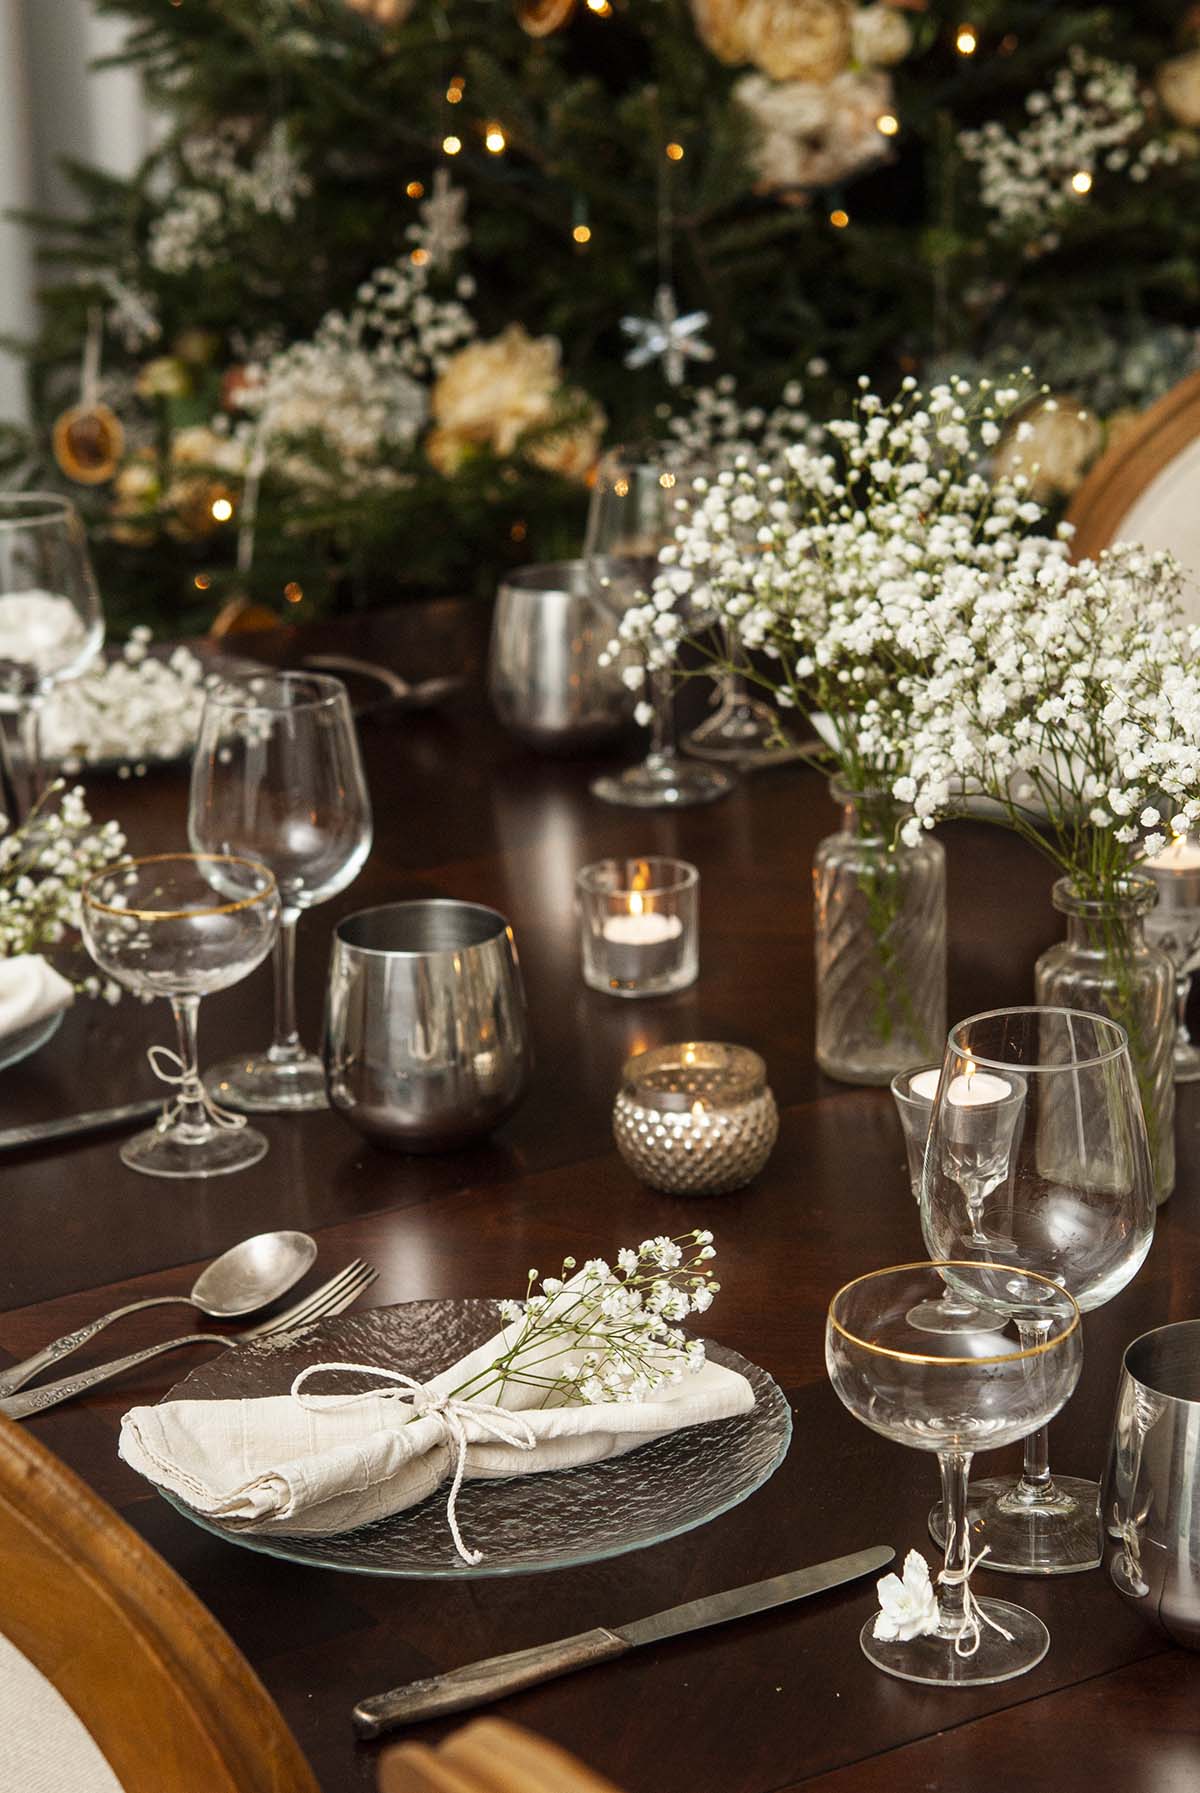 A decorated dinner table with baby's breath in front of a decorated Christmas tree.